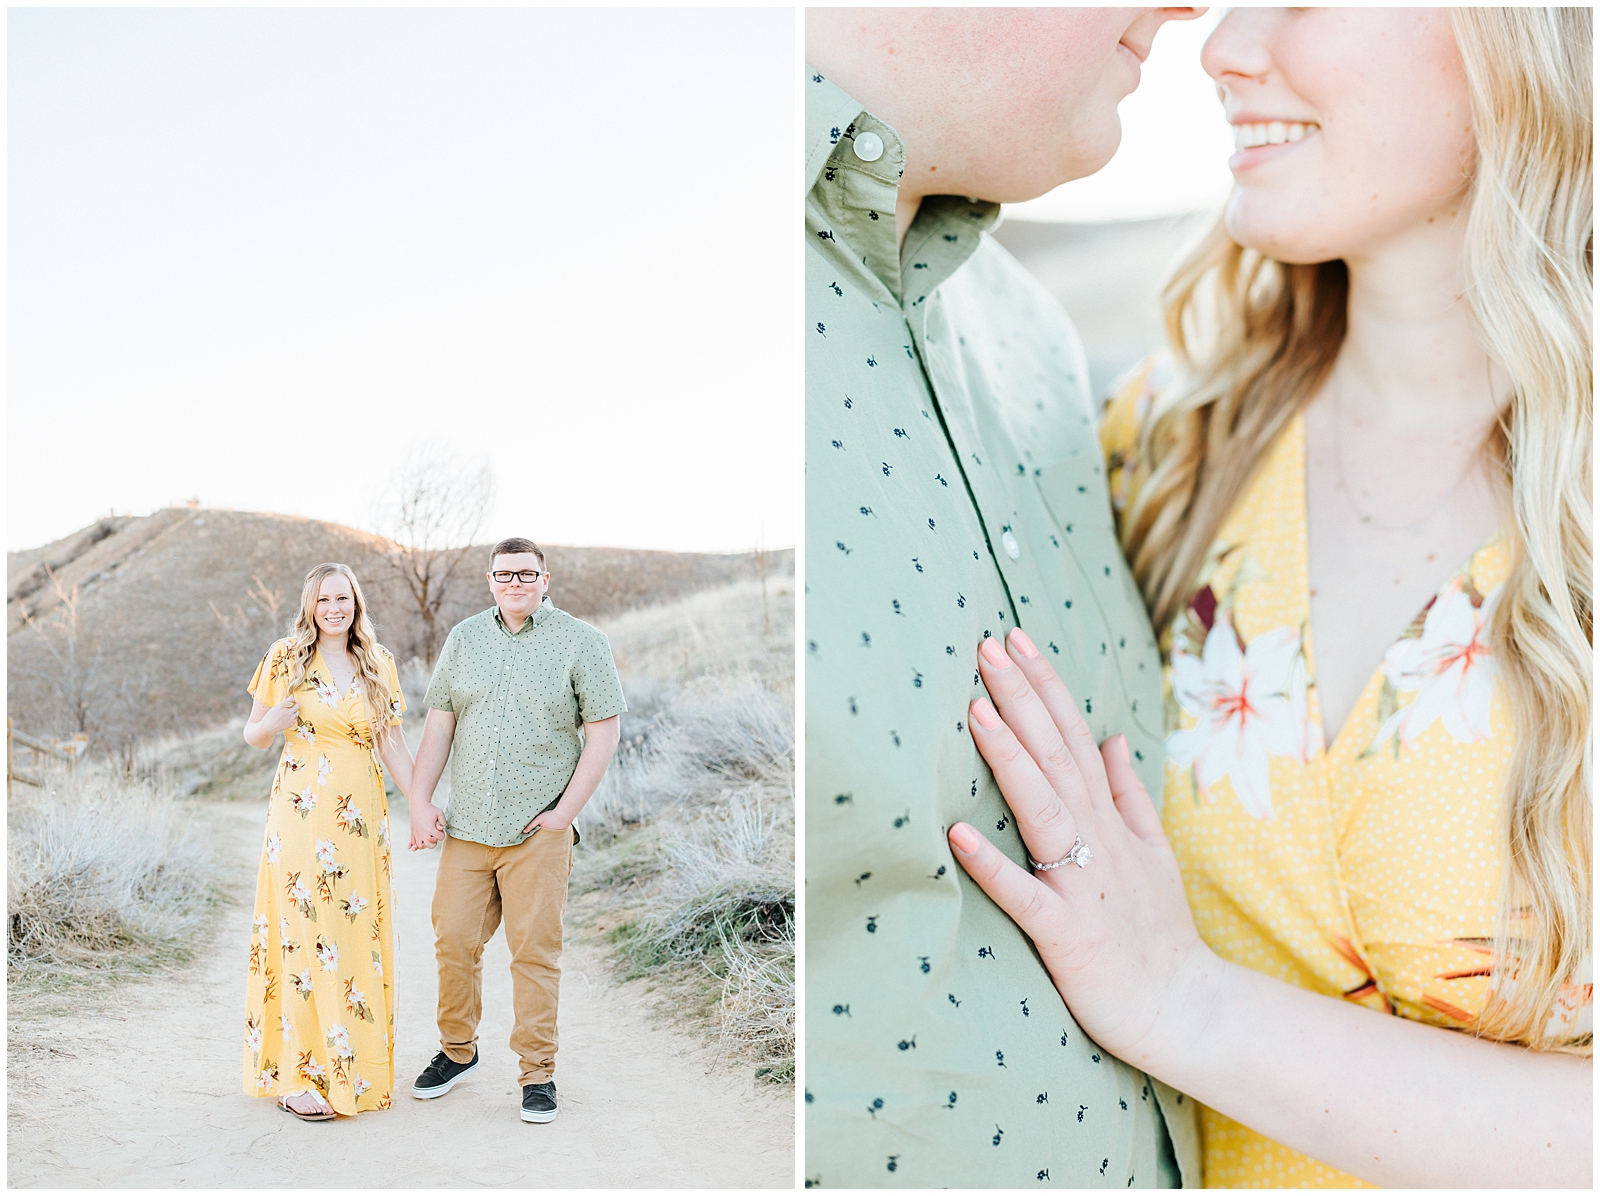 Camel's Back Spring Engagement in the Boise Foothills Engagement Session Light and Airy Photographer